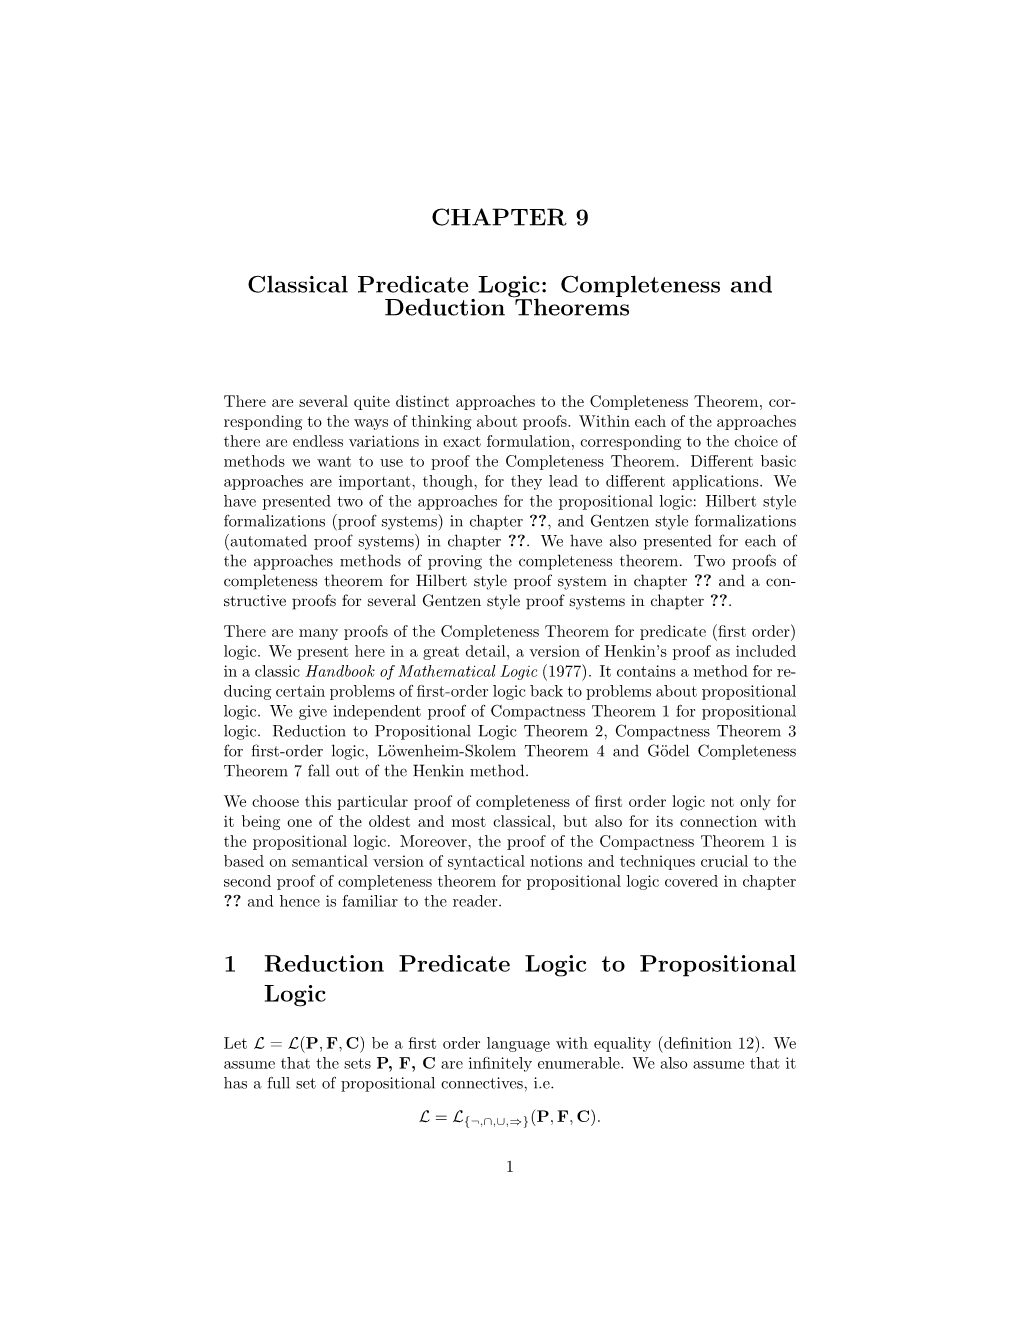 CHAPTER 9 Classical Predicate Logic: Completeness and Deduction